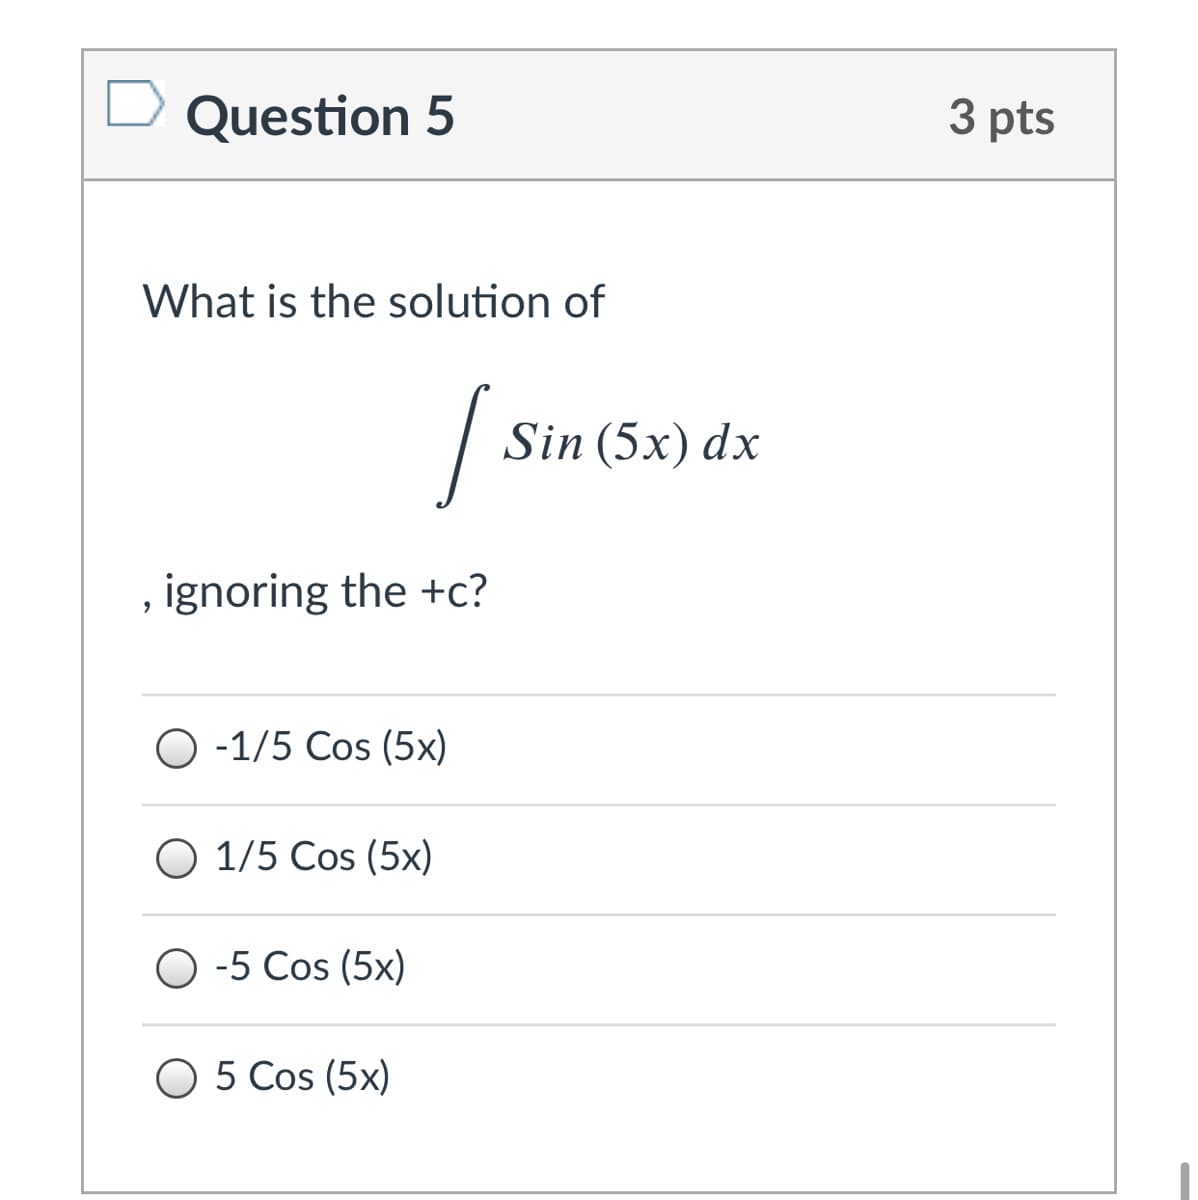 Question 5
3 pts
What is the solution of
Sin (5x) dx
, ignoring the +c?
O -1/5 Cos (5x)
O 1/5 Cos (5x)
O -5 Cos (5x)
O 5 Cos (5x)
